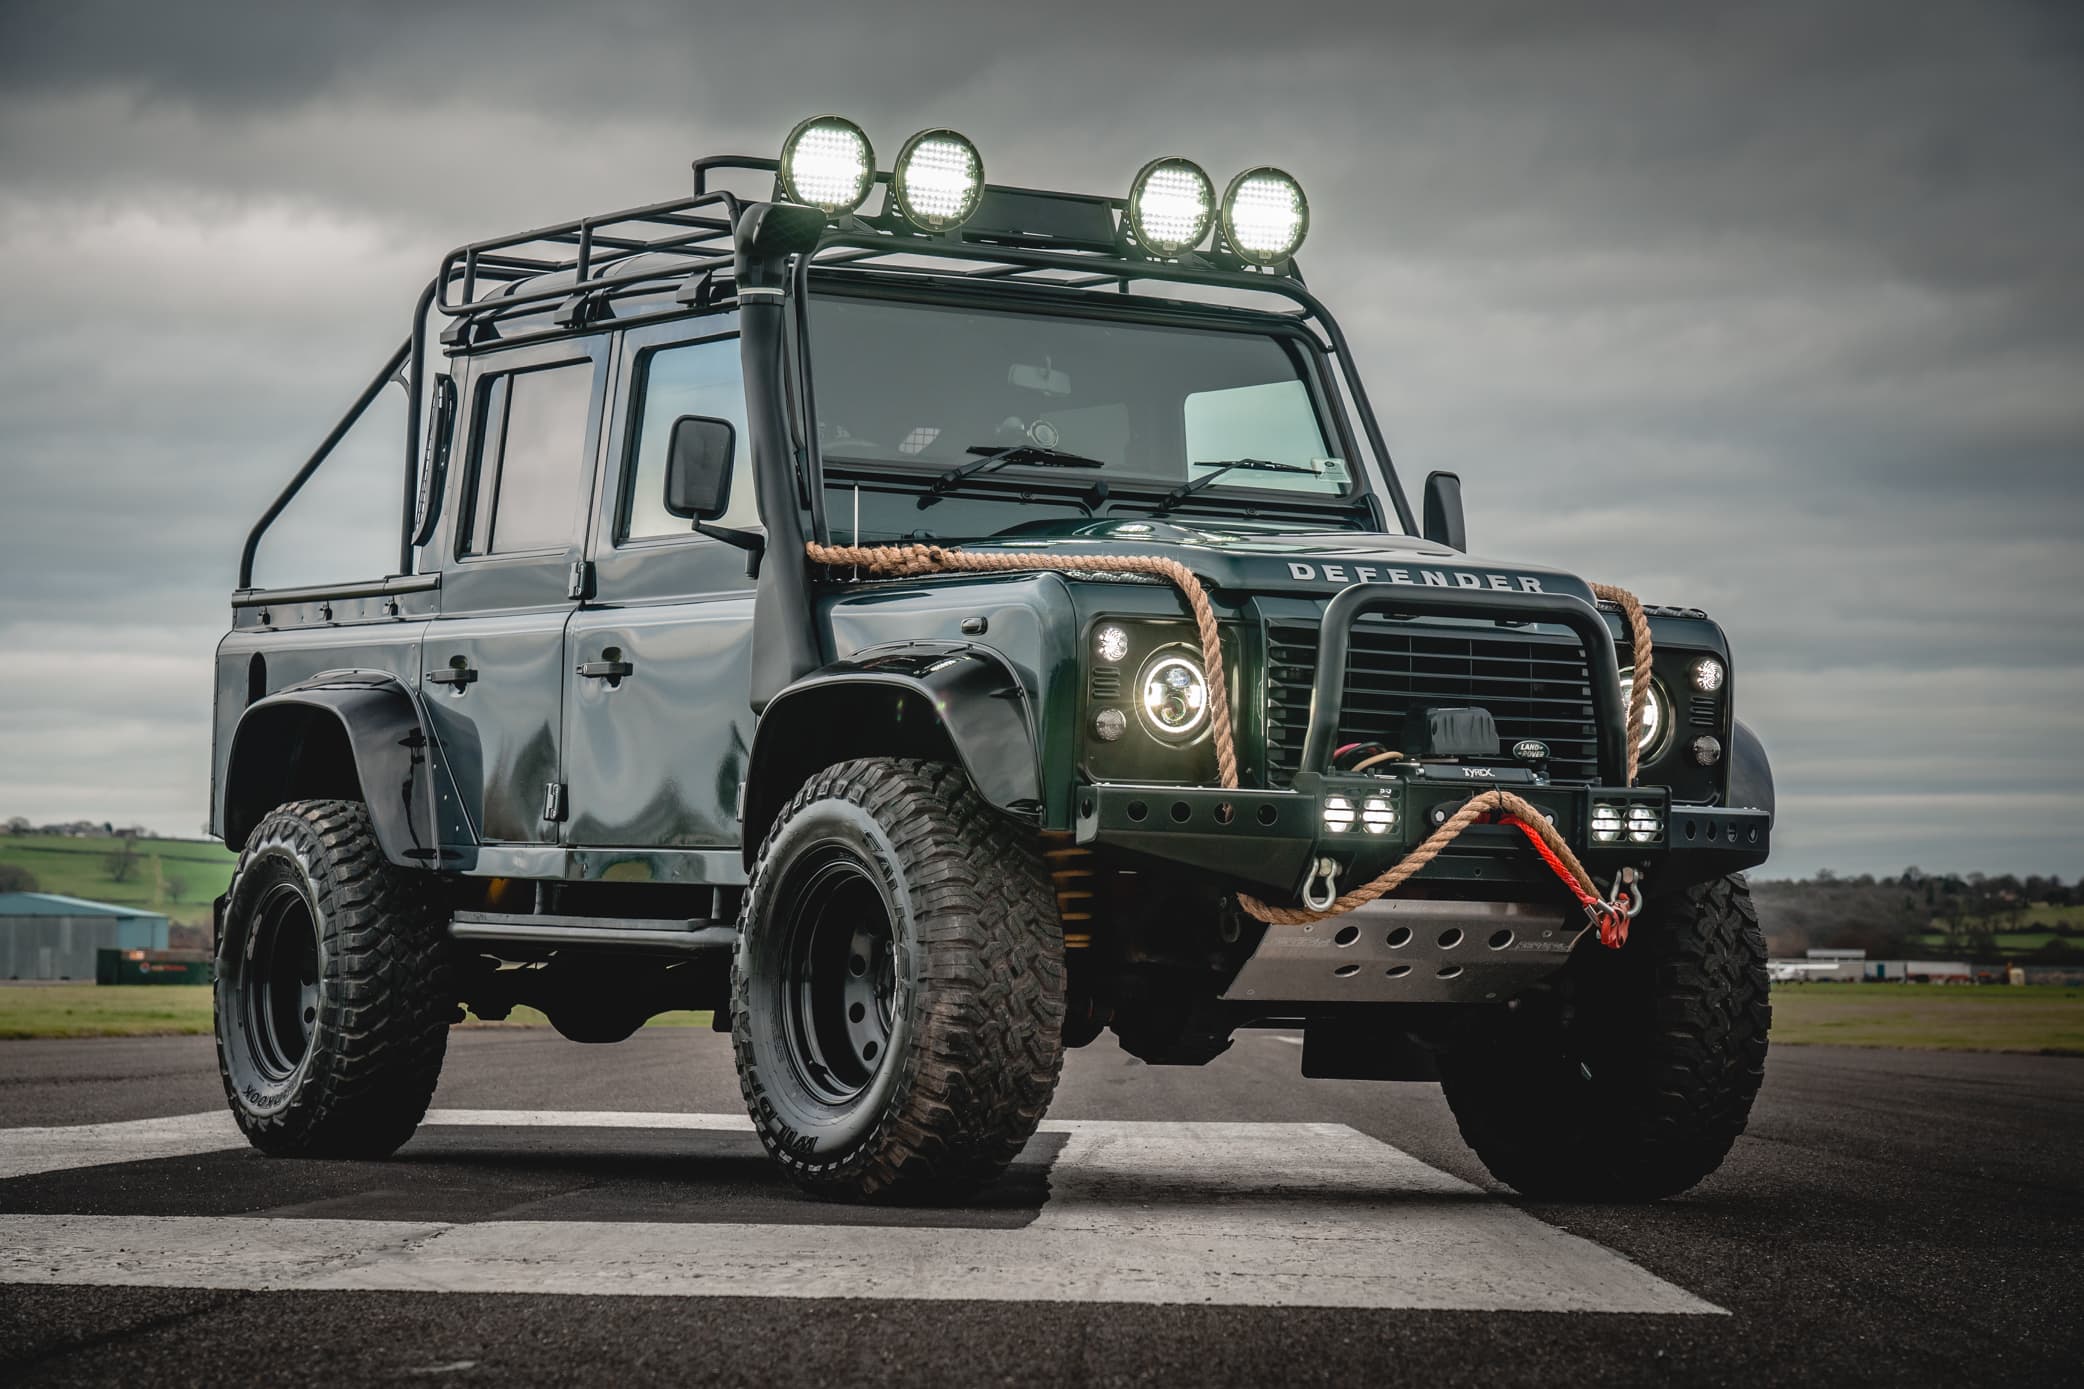 2015 SPECTRE style Defender 110 double cab pickup XS spec - 16th Feb